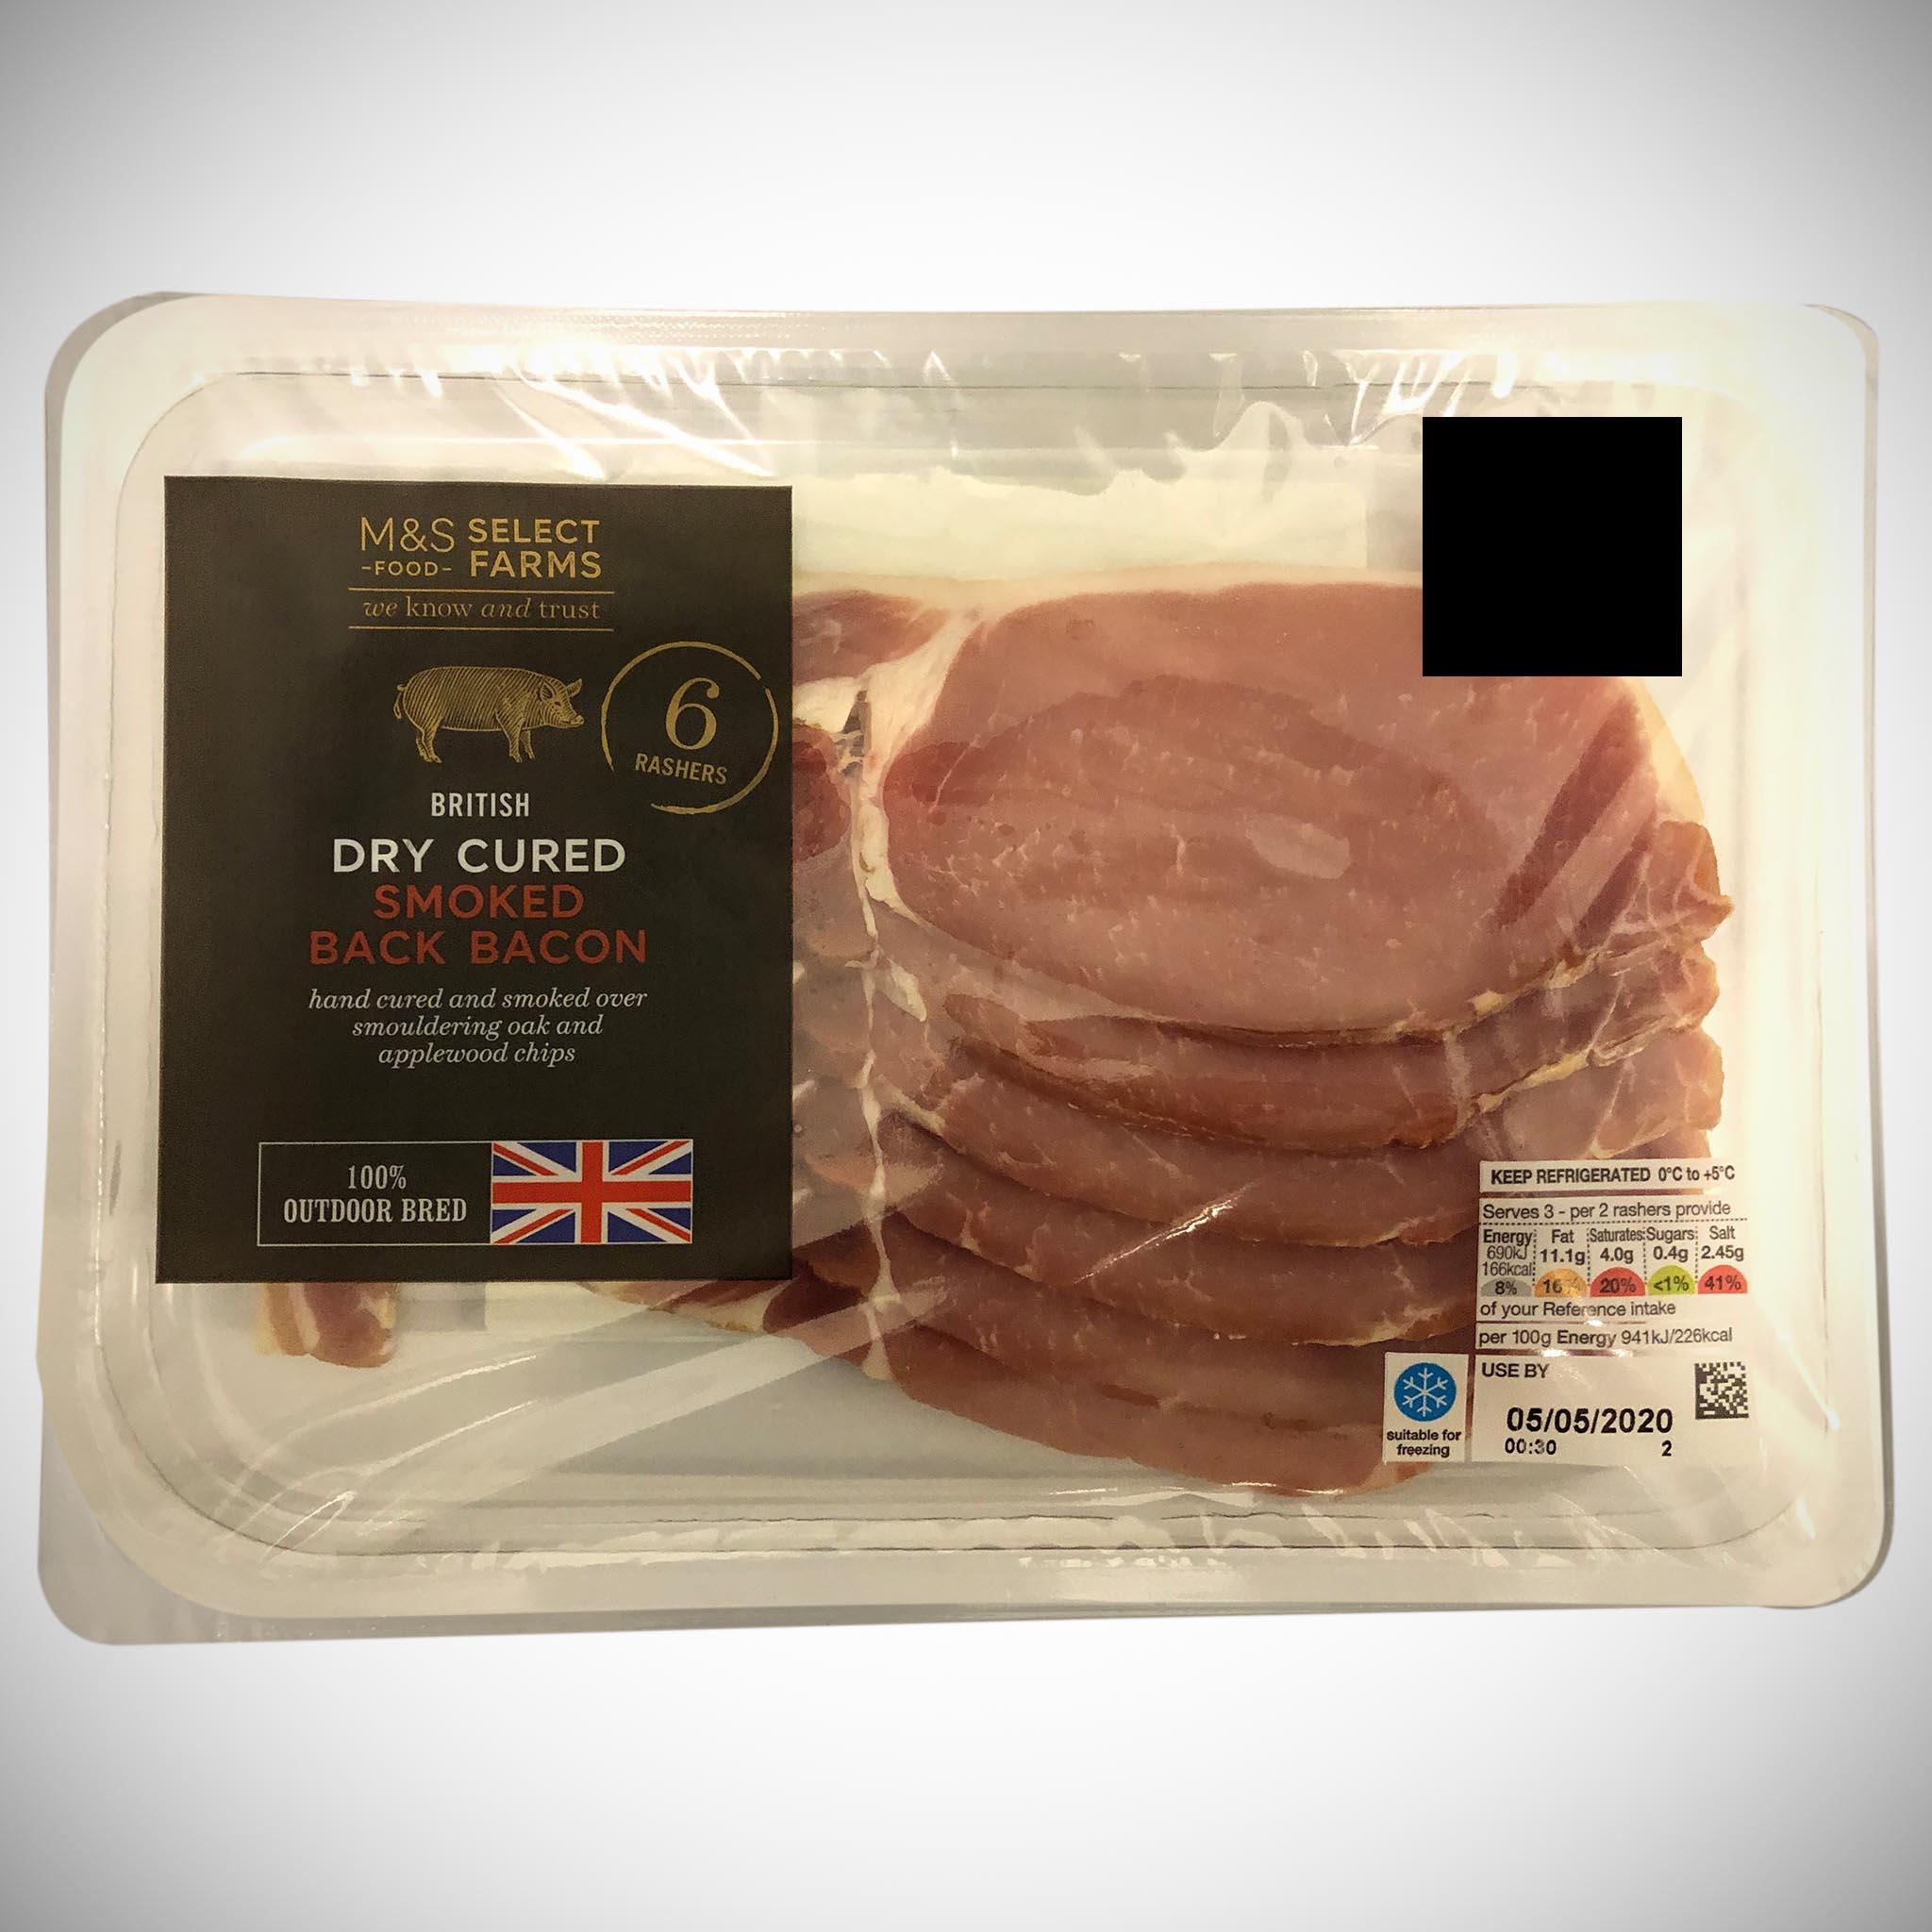 Outdoor Bred Smoked Back Bacon (6 Rashers) 220g